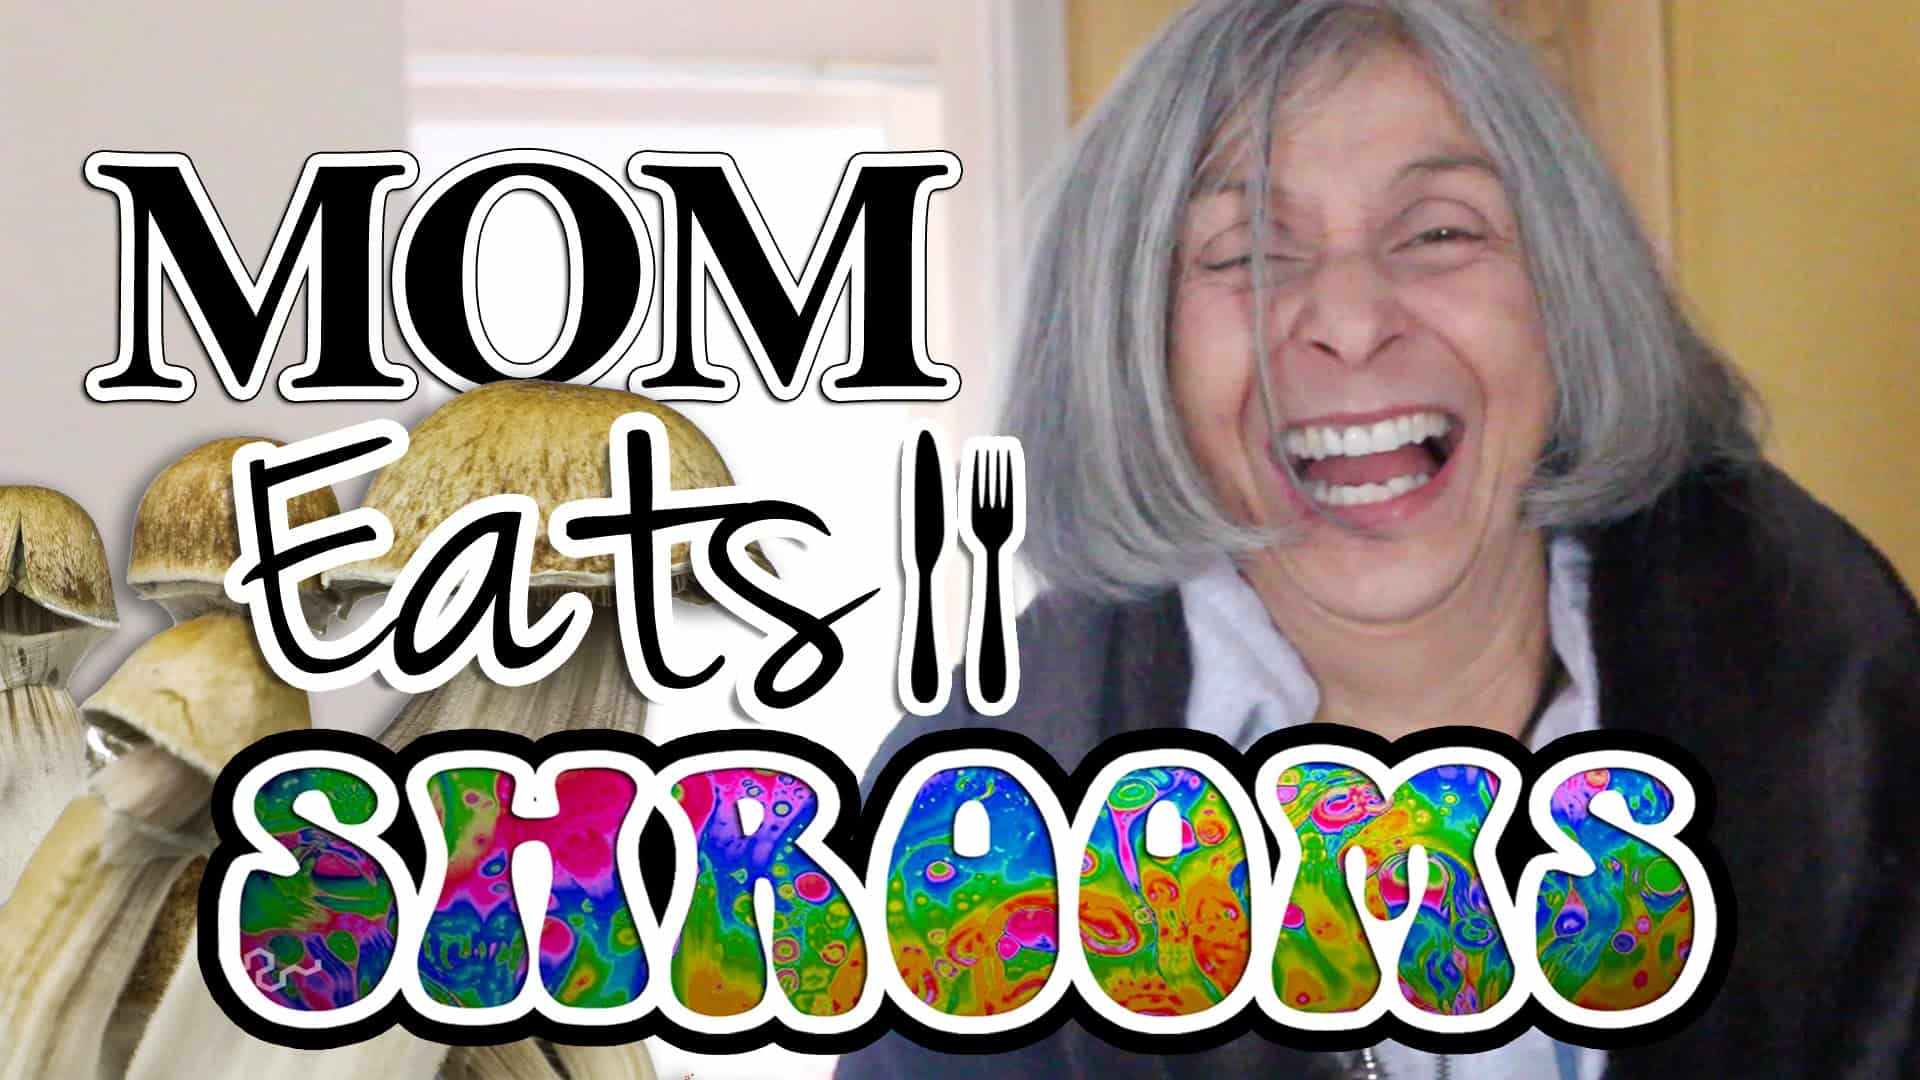 61 year old eats magic mushrooms for the first time